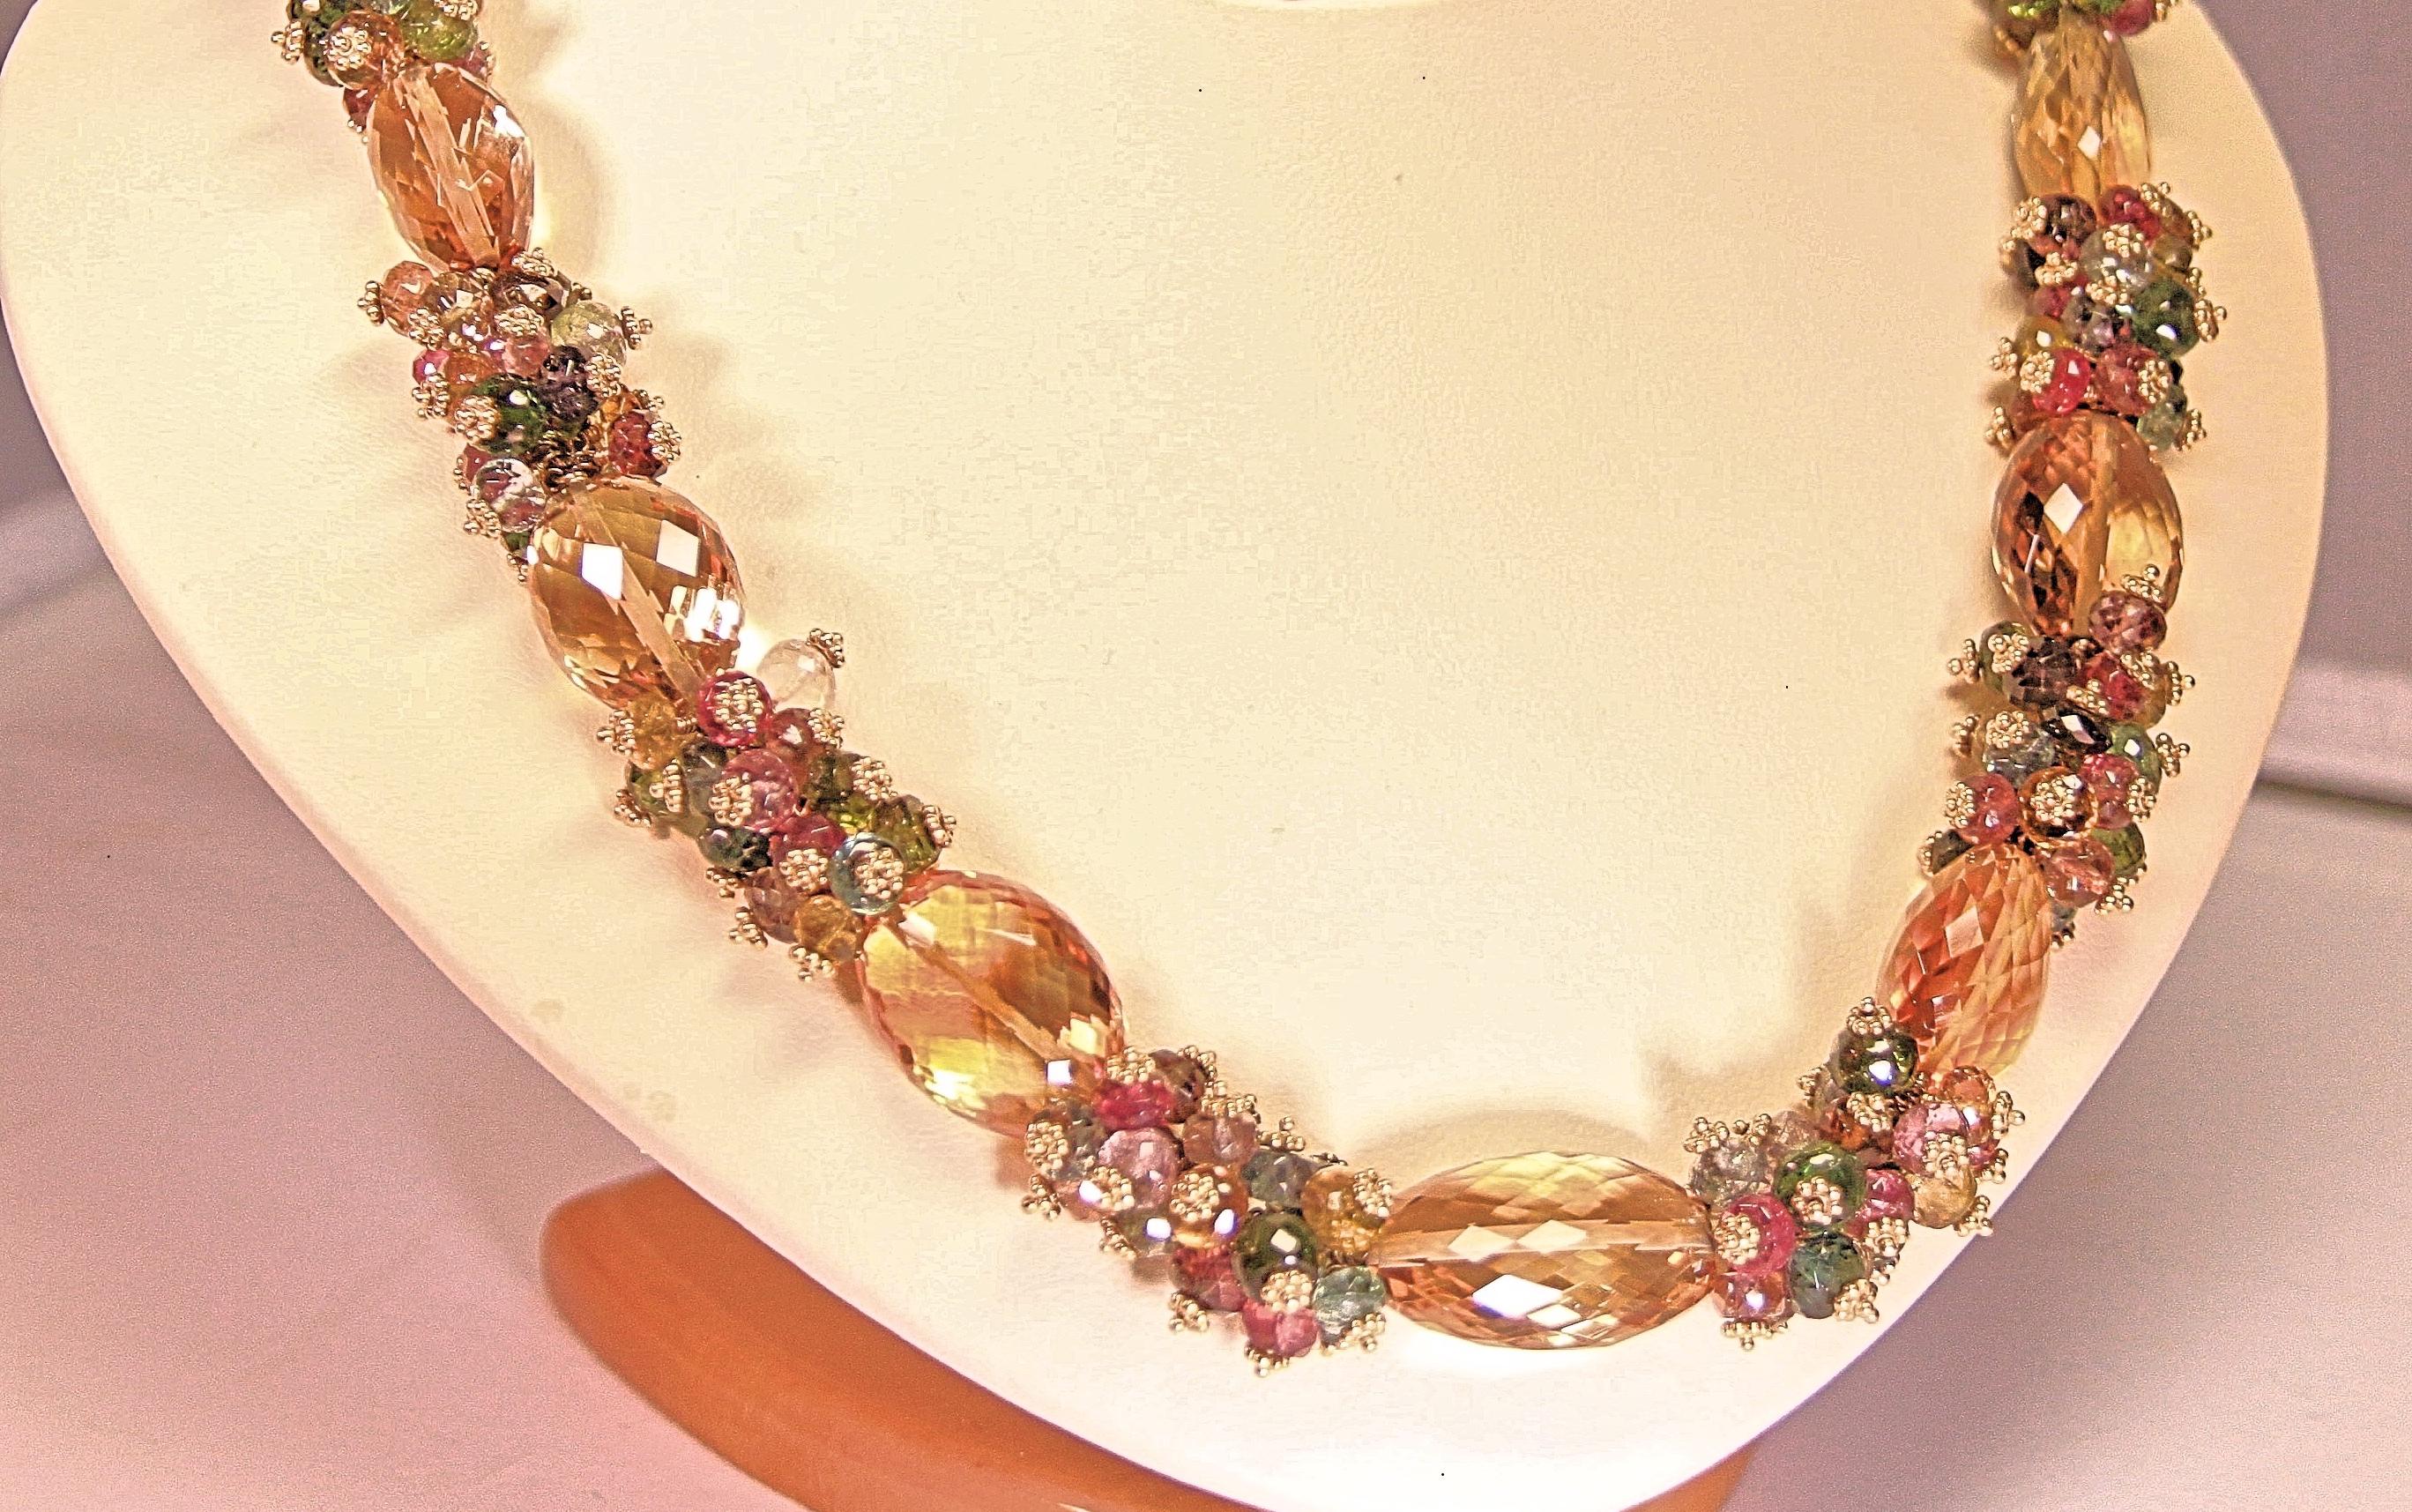 This necklace is a multi-colored semiprecious stone necklace that was designed by Marya Dabrowski.  The stones are yellow citrines and blue, green, pink, purple tourmalines.   The stones are beautiful faceted colors with an 18 karat yellow gold